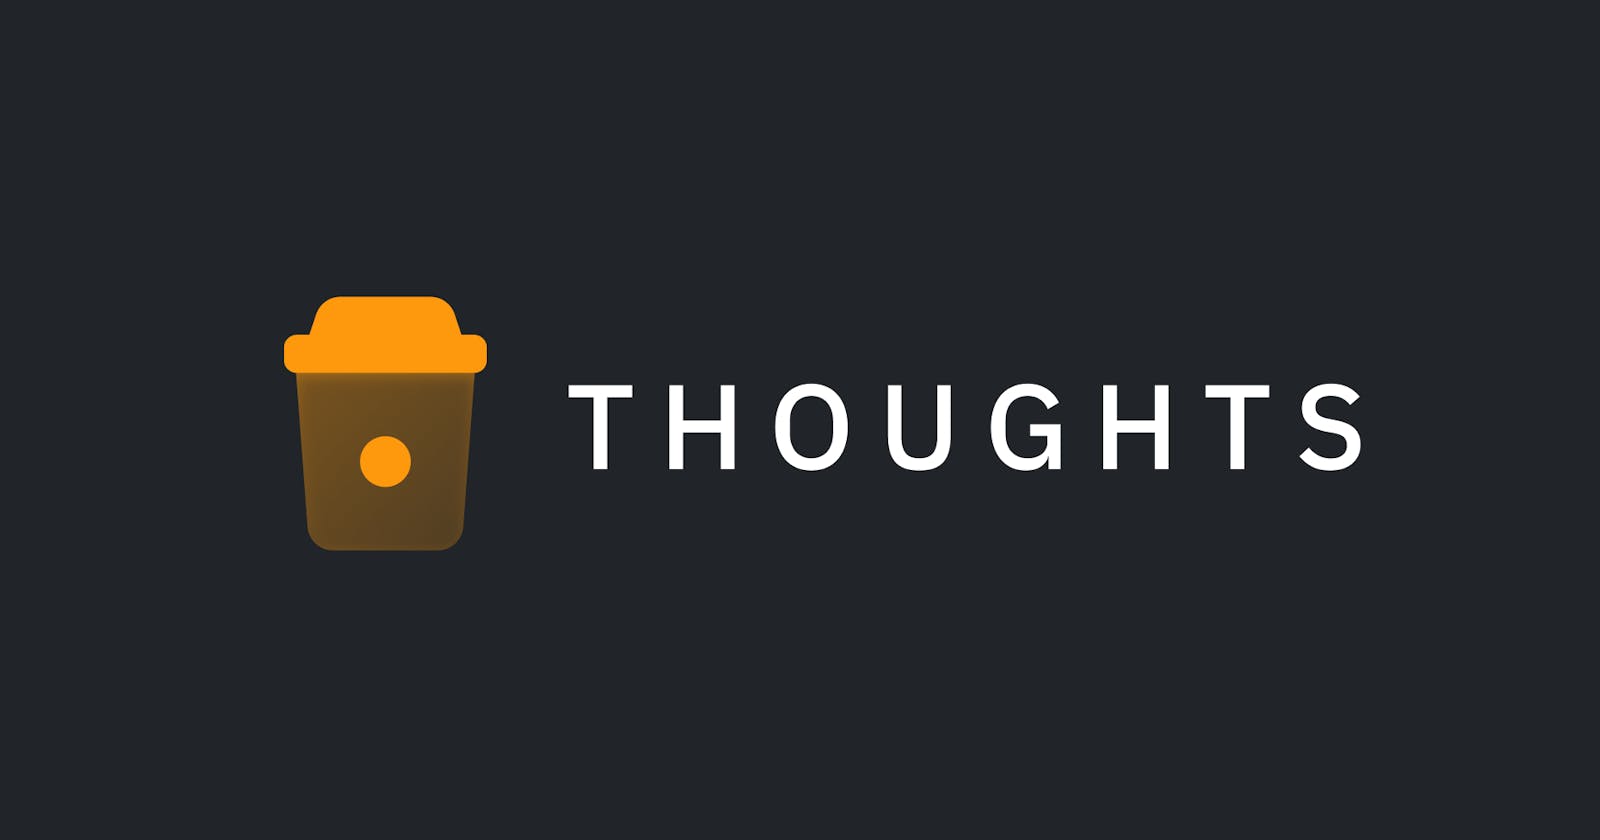 Introducing to you the simplest and most fascinating social network - Thoughts.